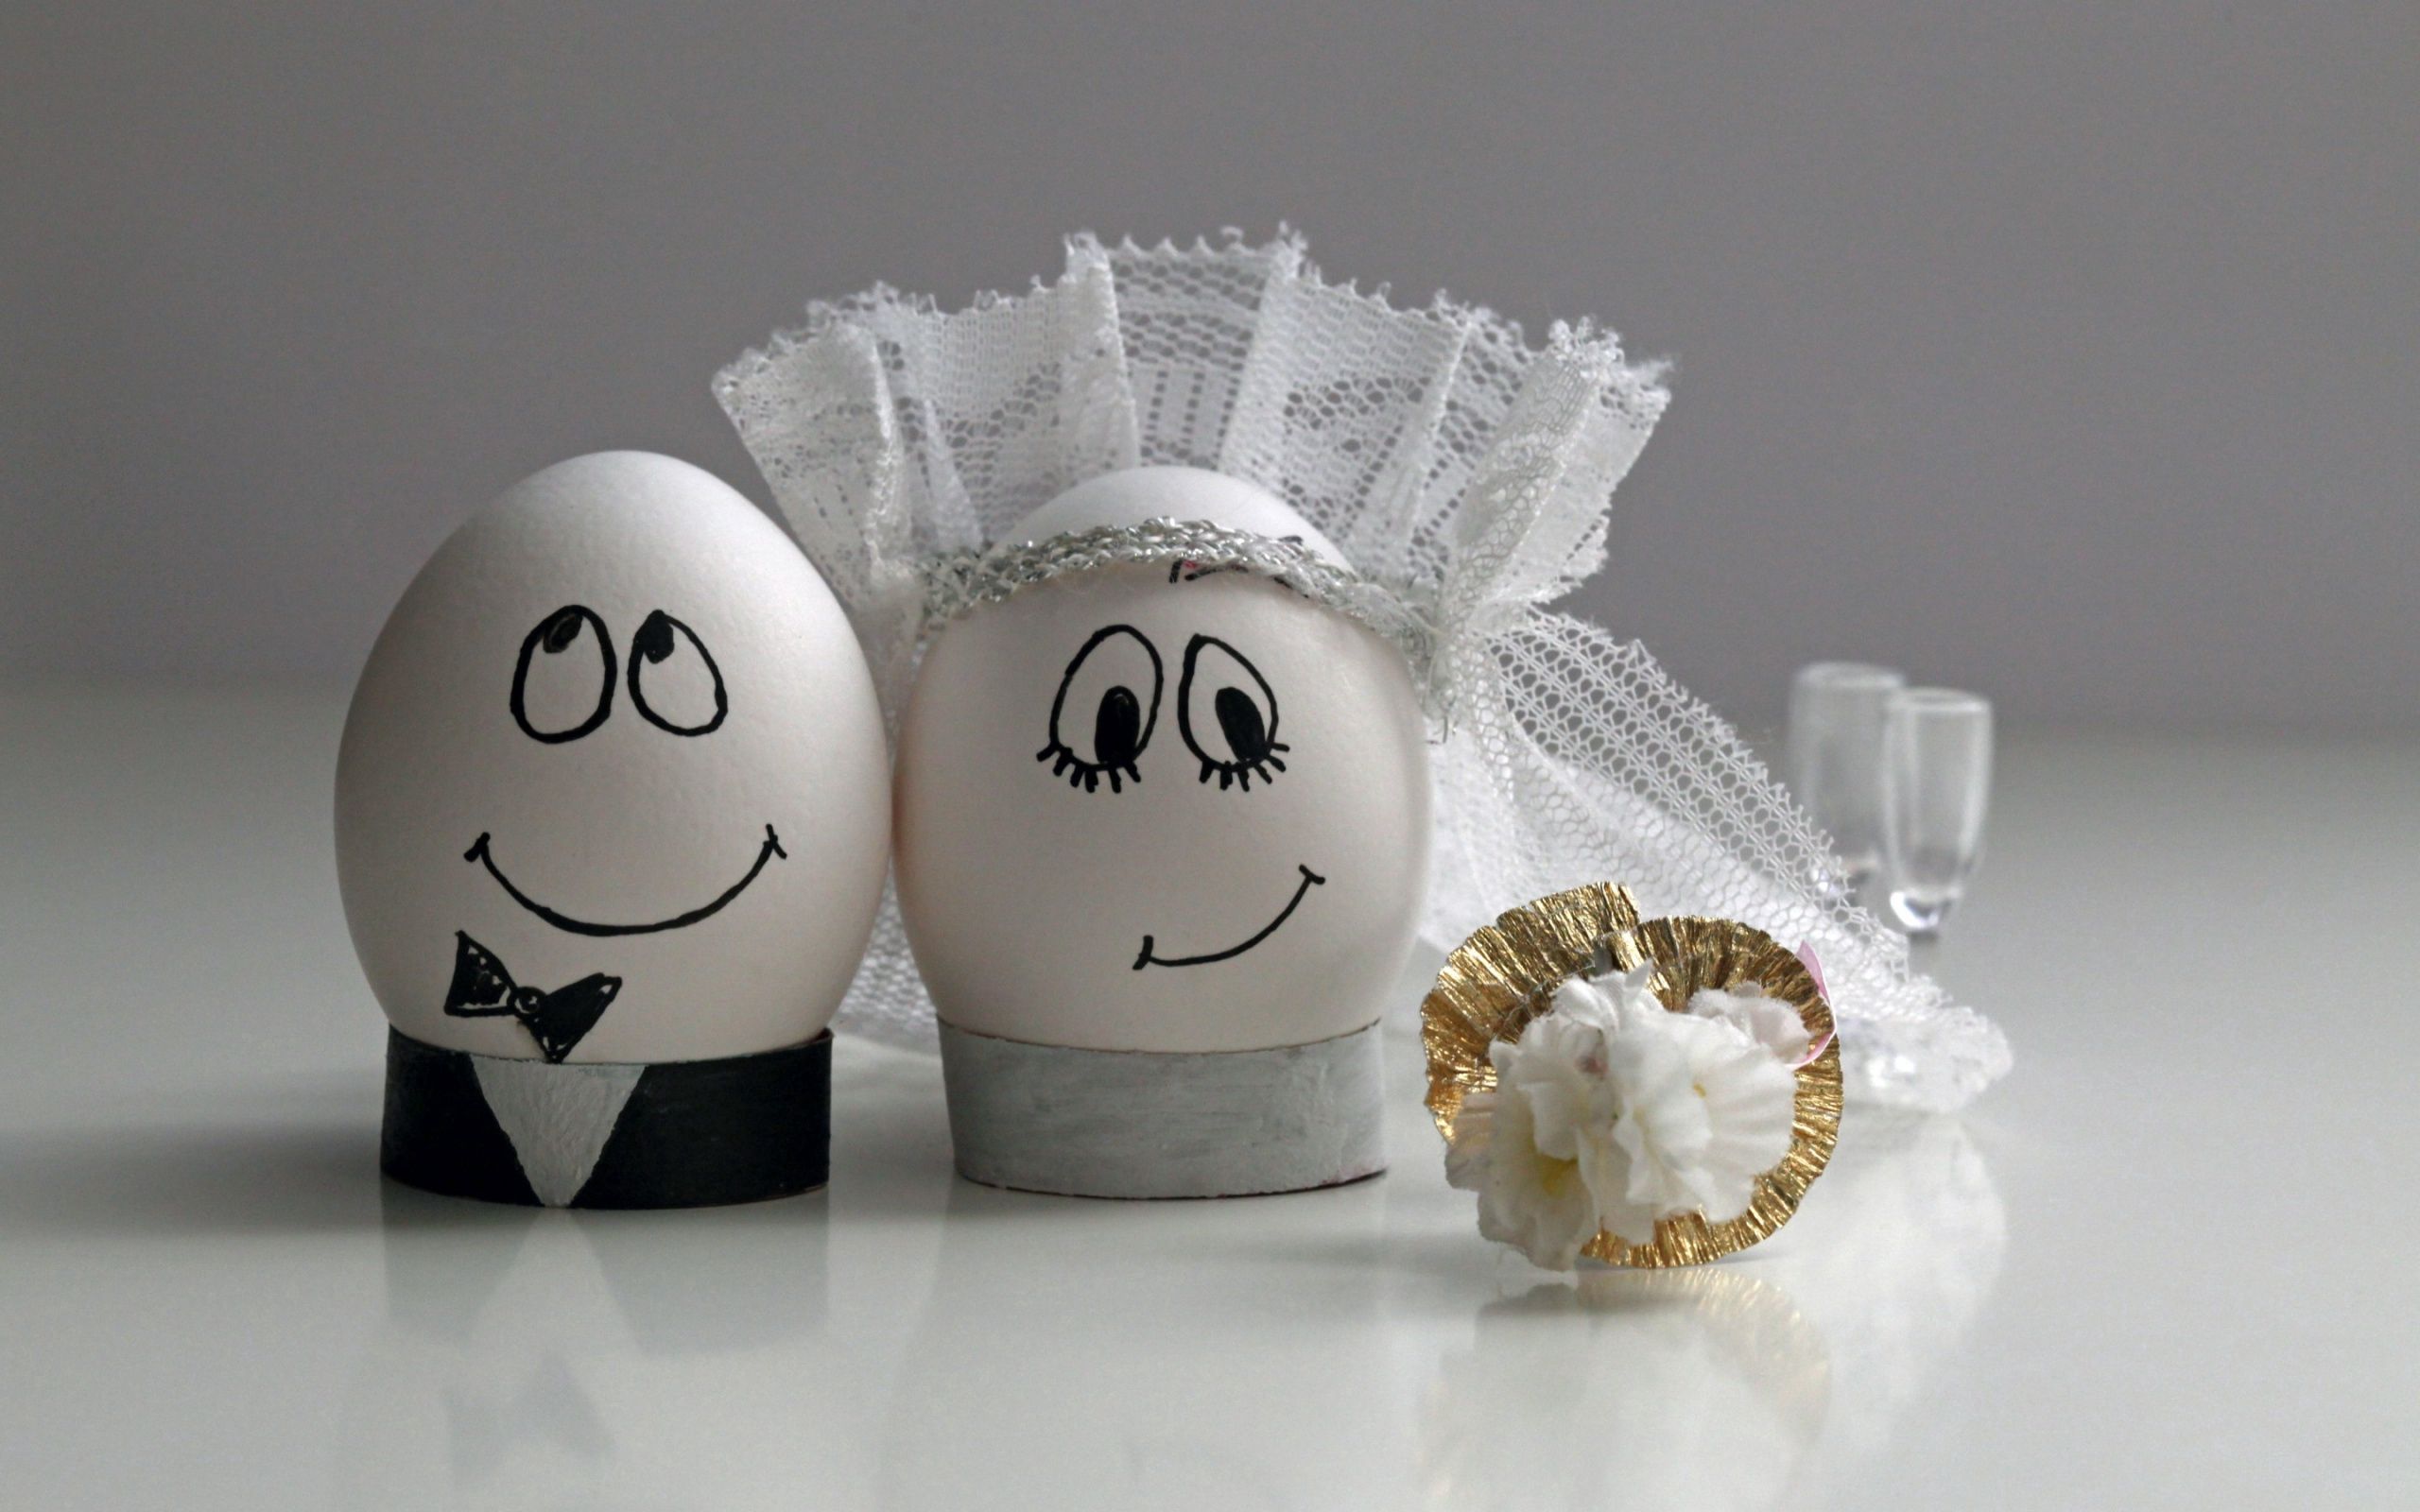 pair, wedding, holidays, eggs, easter, couple, decoration cellphone